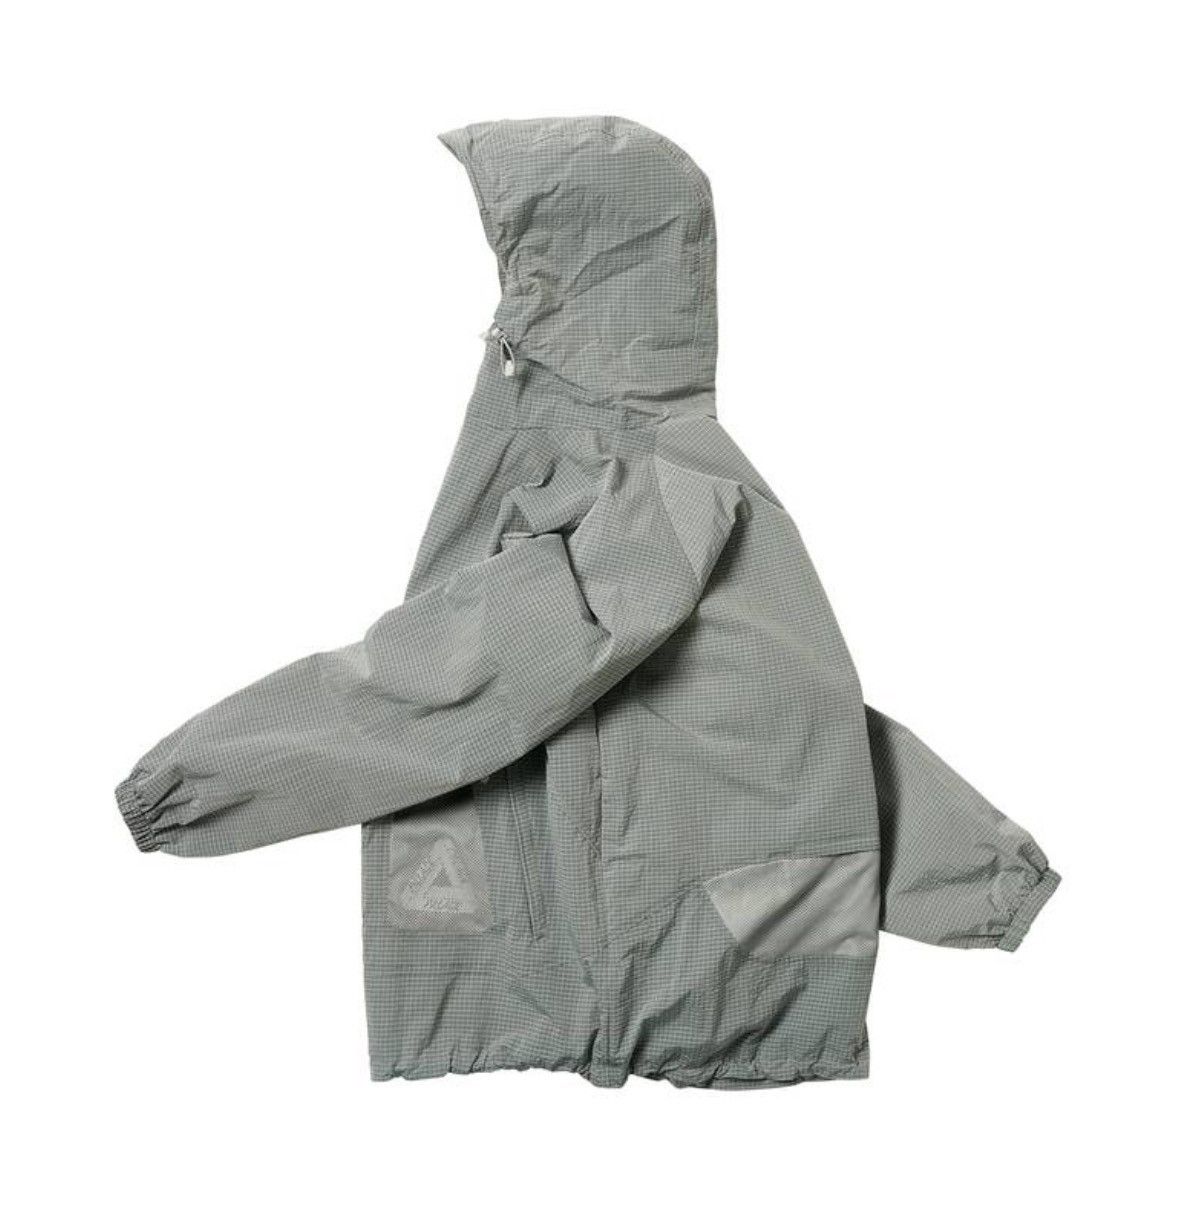 Palace palace y ripstop shell jacket | Grailed